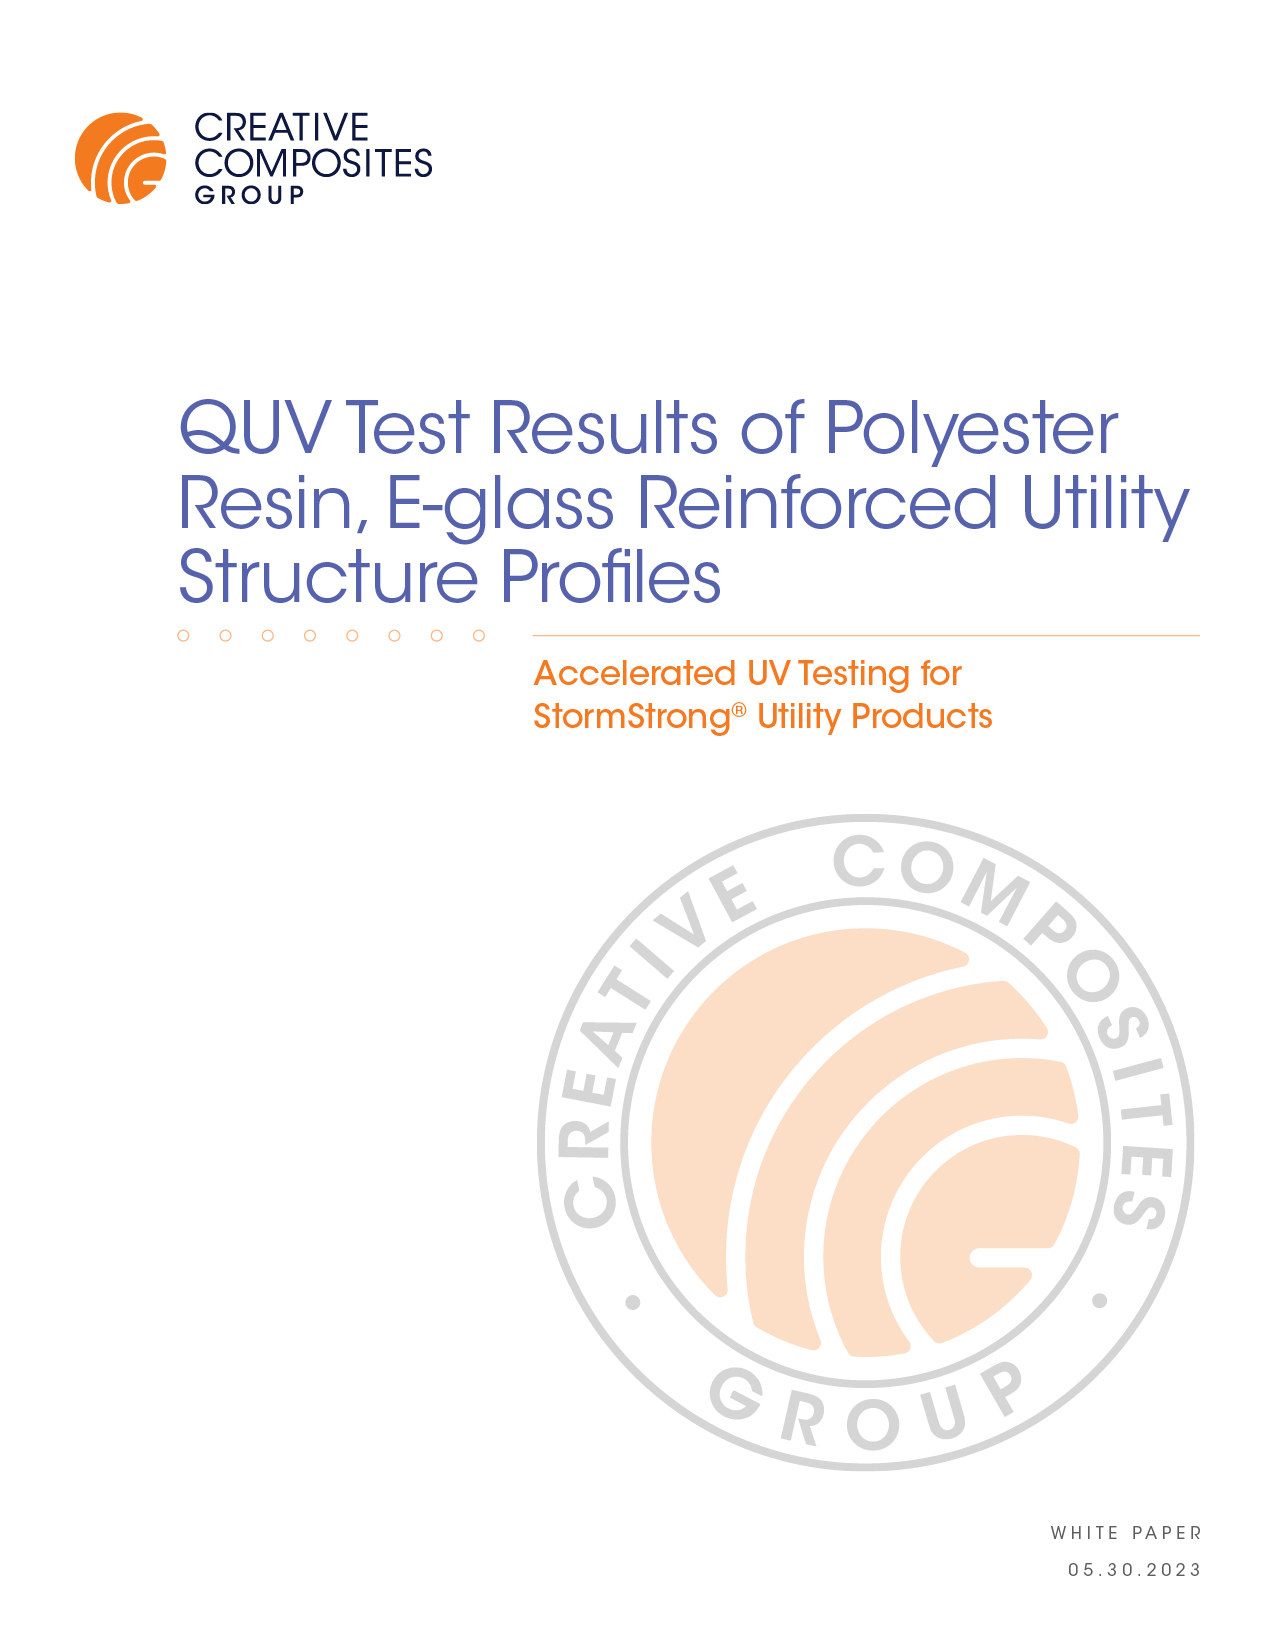 QUV Test Results of Polyester Resin, E-glass Reinforced Utility Structure Profiles